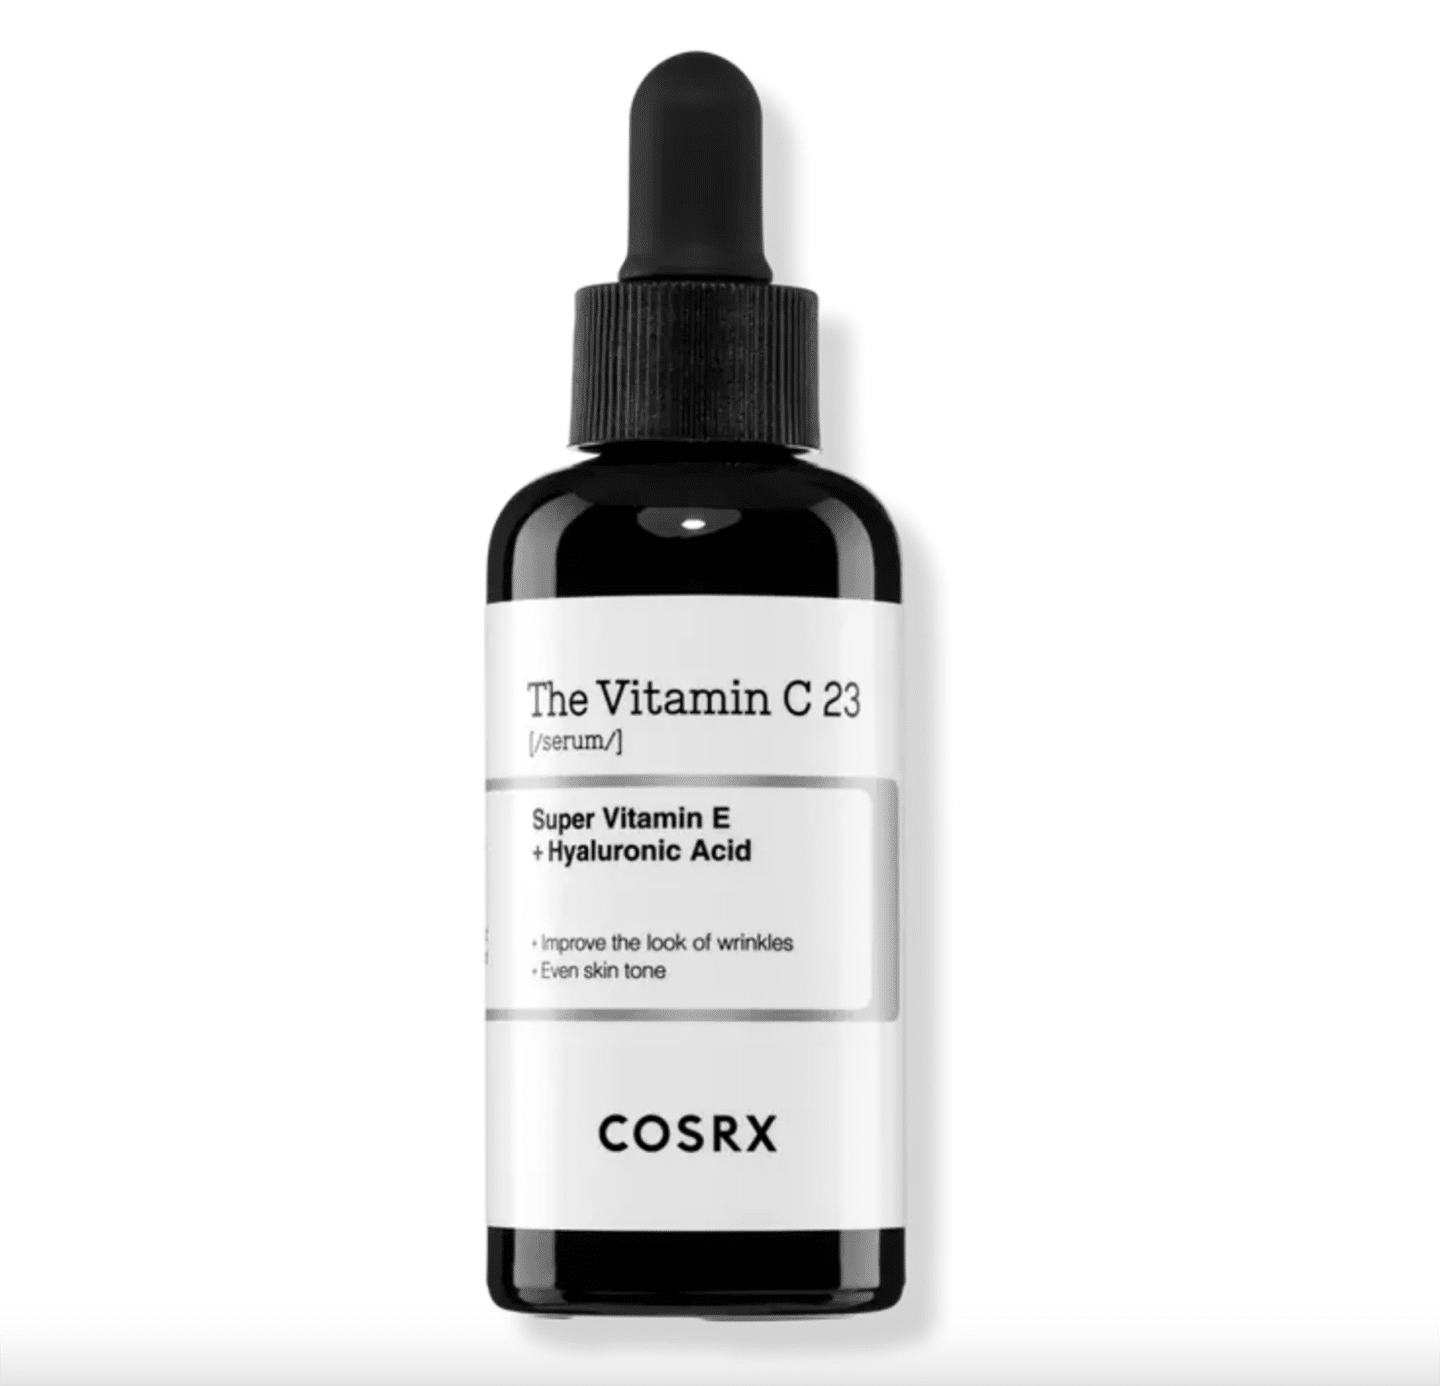 How to use glycolic acid and vitamin C, by beauty blogger What The Fab